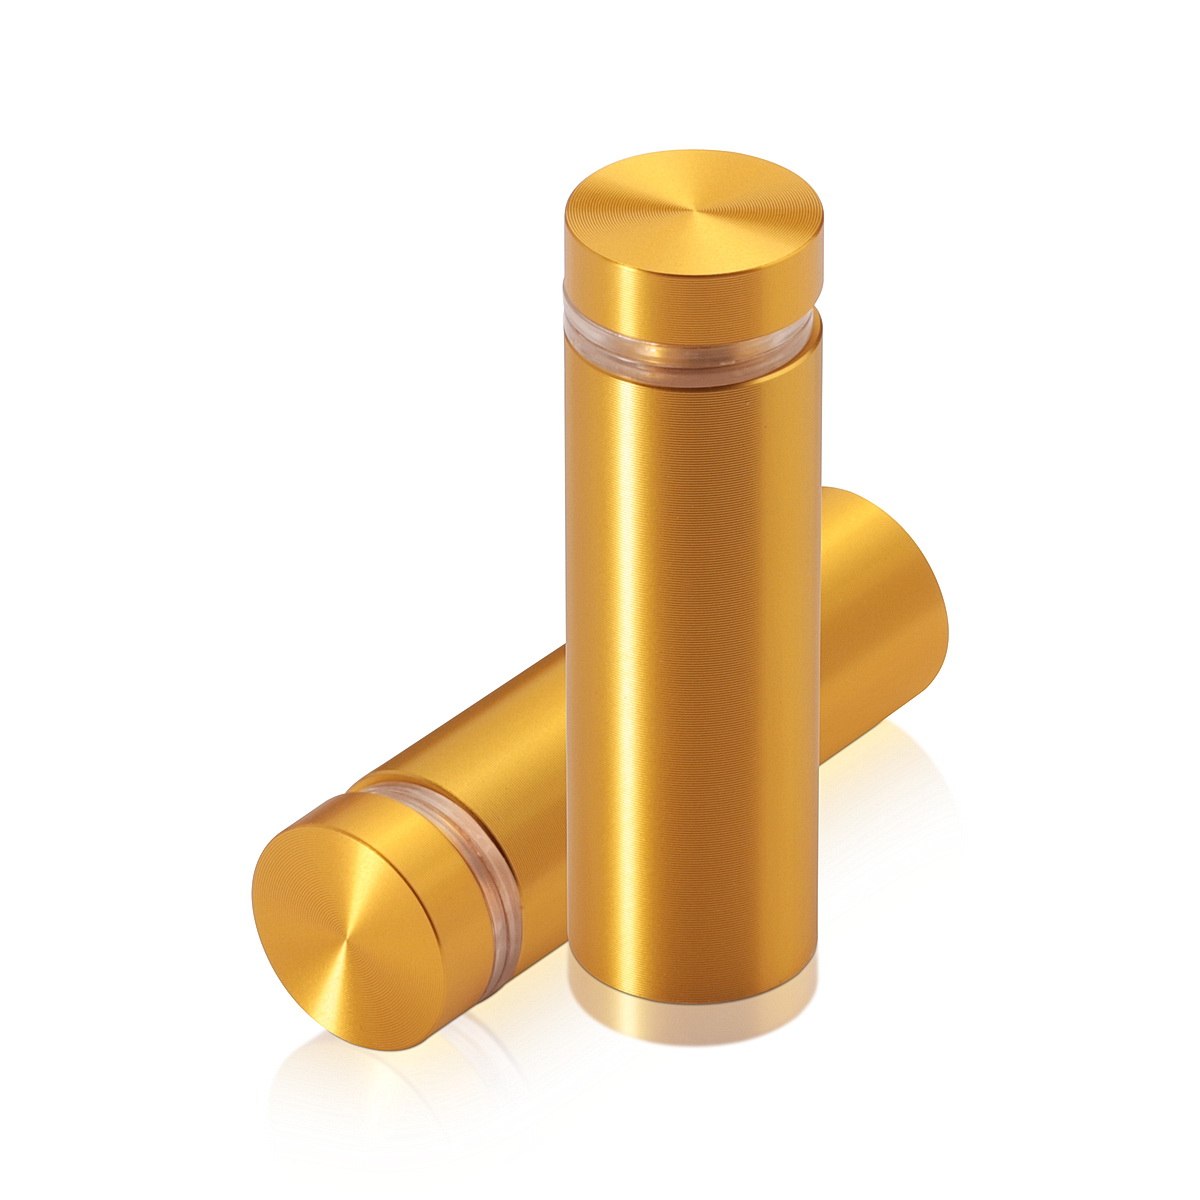 5/8'' Diameter X 1-3/4'' Barrel Length, Aluminum Flat Head Standoffs, Gold Anodized Finish Easy Fasten Standoff (For Inside / Outside use) Tamper Proof Standoff [Required Material Hole Size: 7/16'']